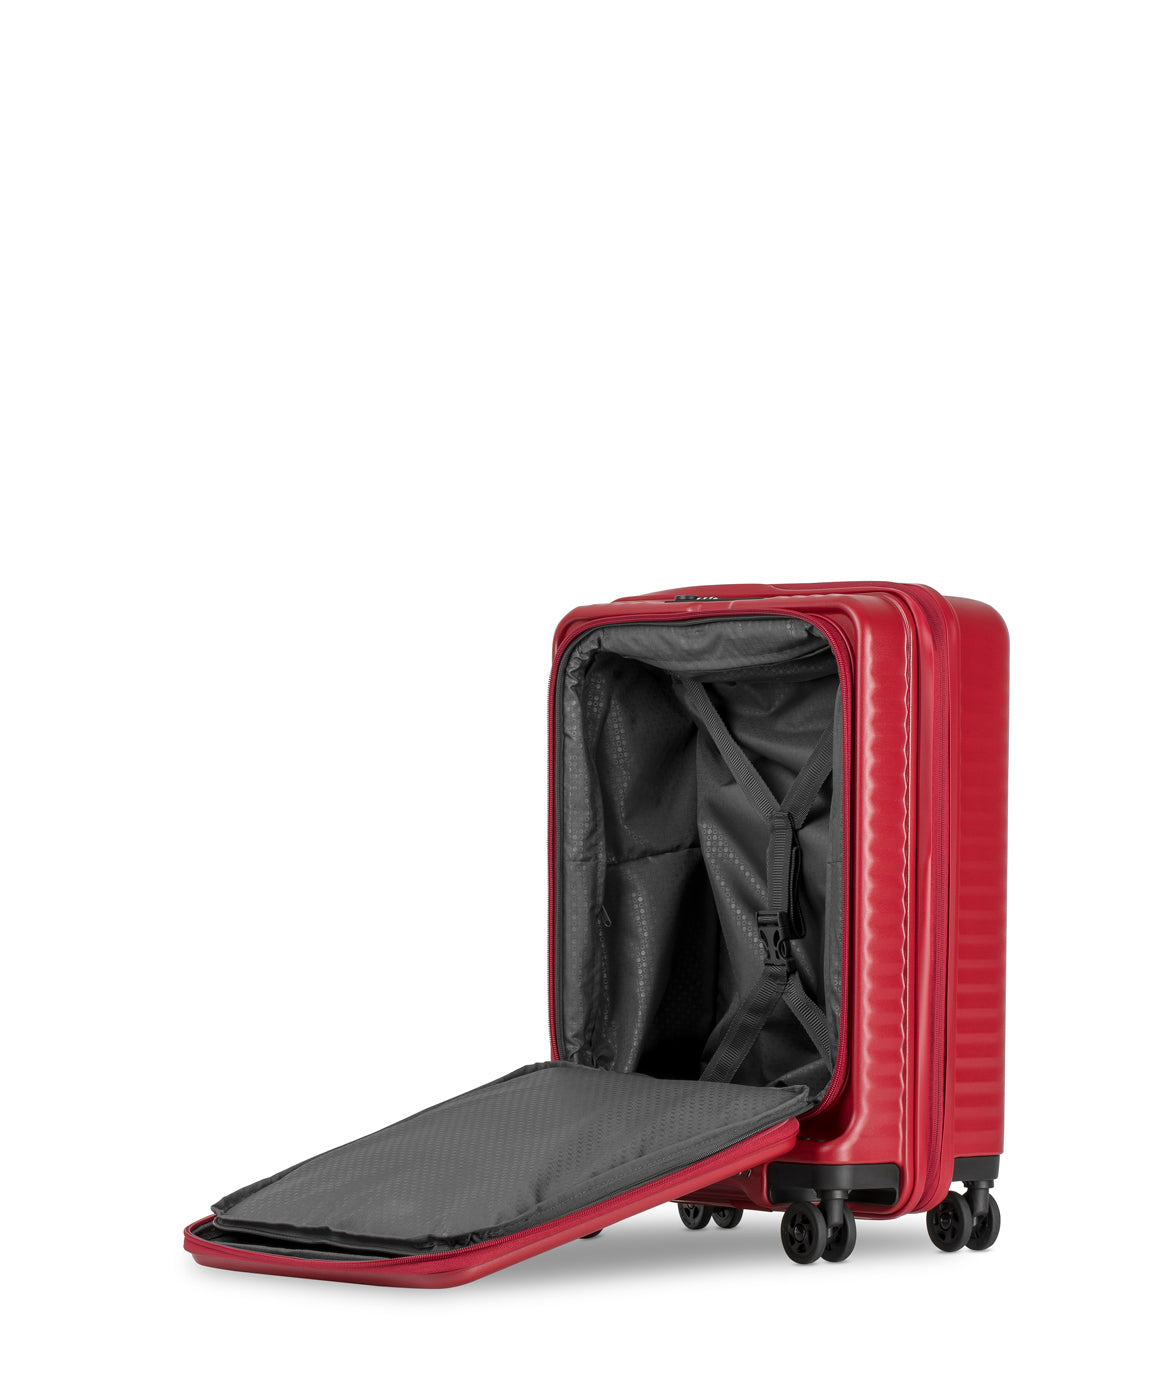 Echolac Celestra Suitcase, Small 55 cm, Red offen 